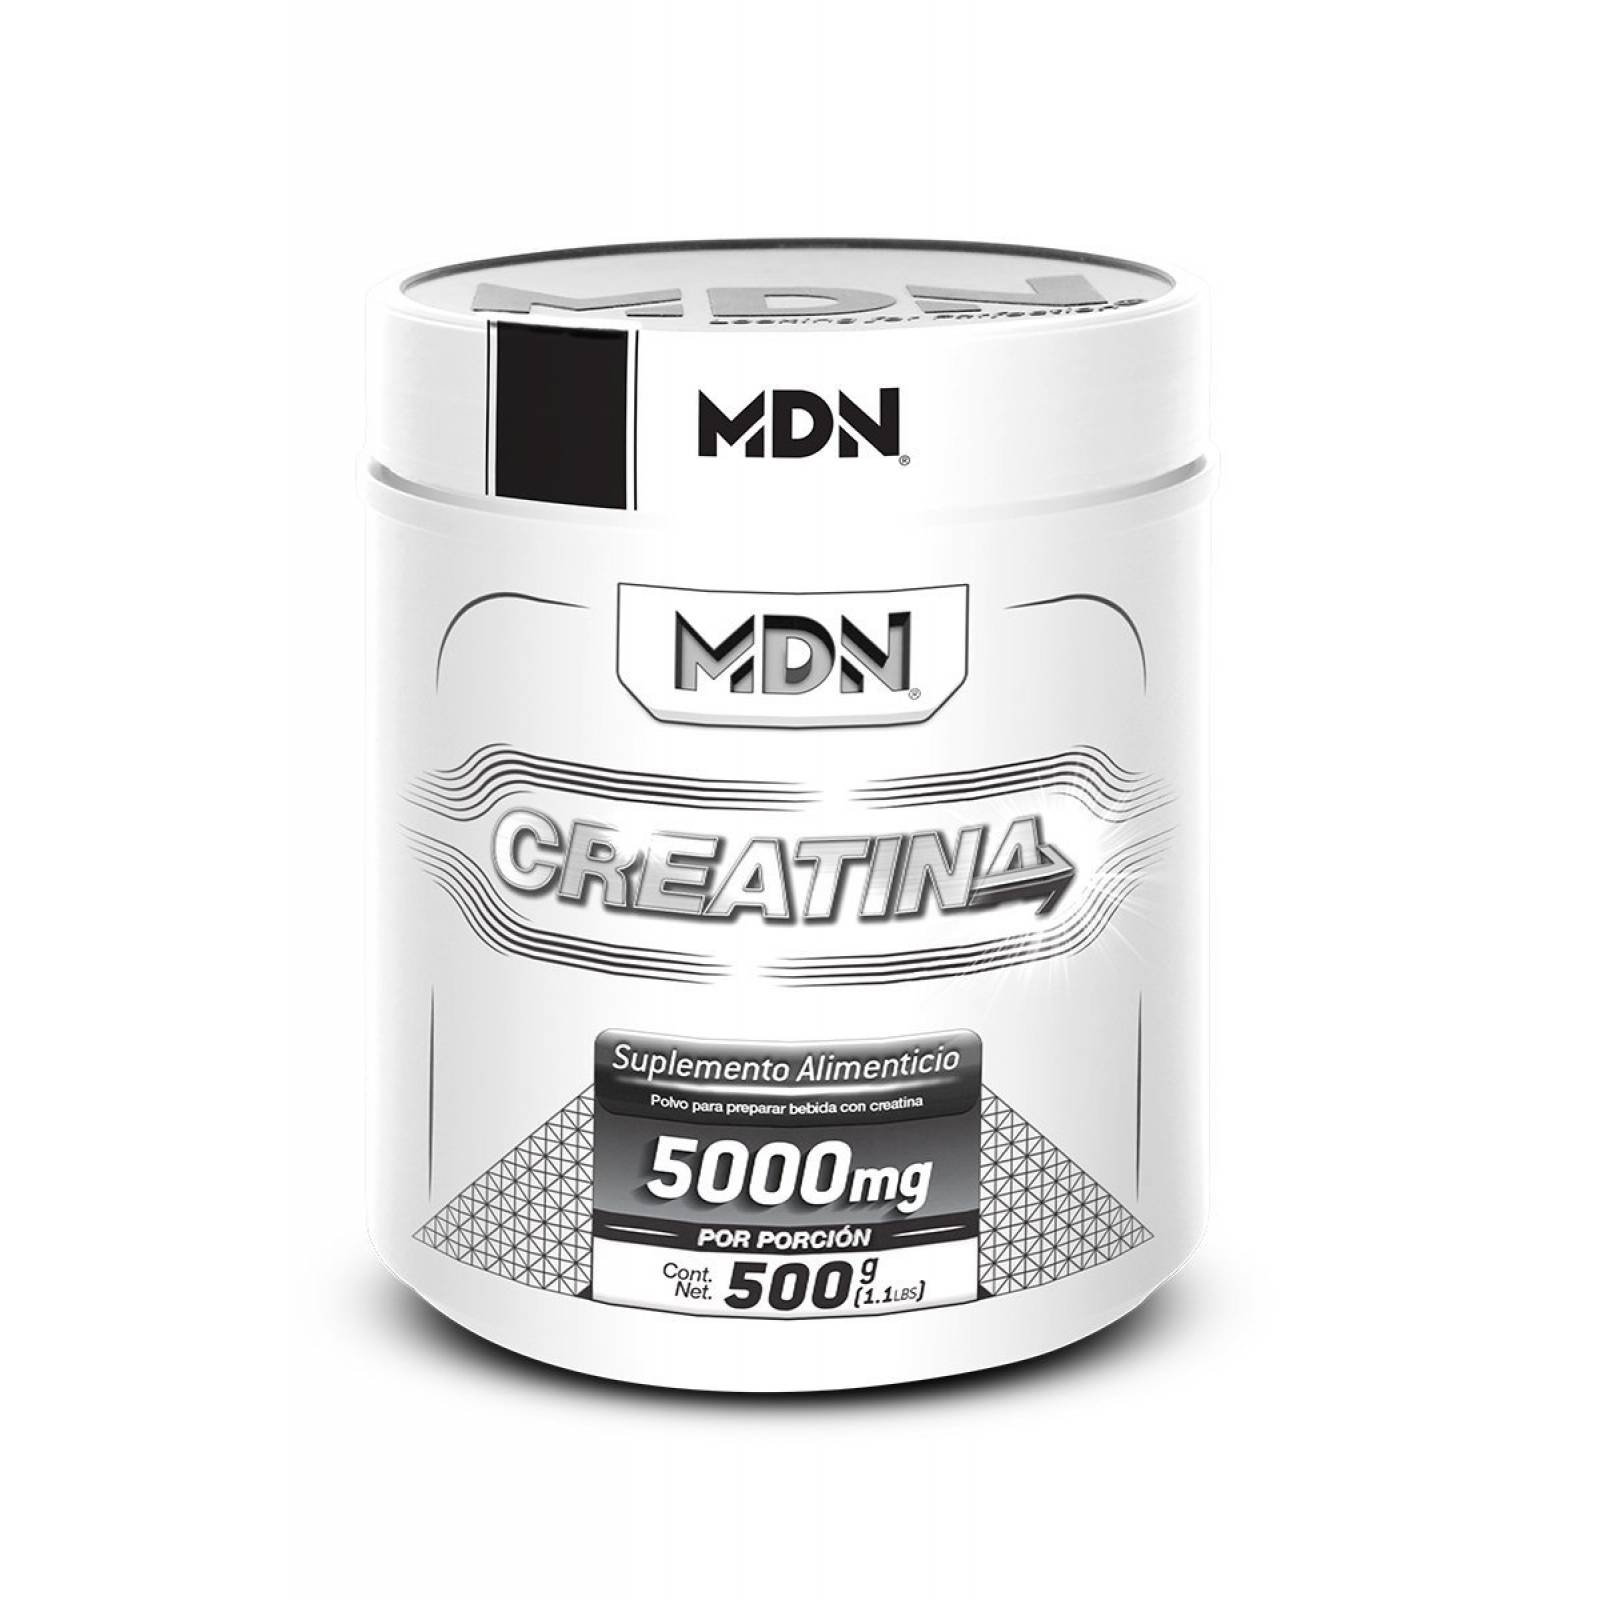 MDN CREATINA UNFLAVORED